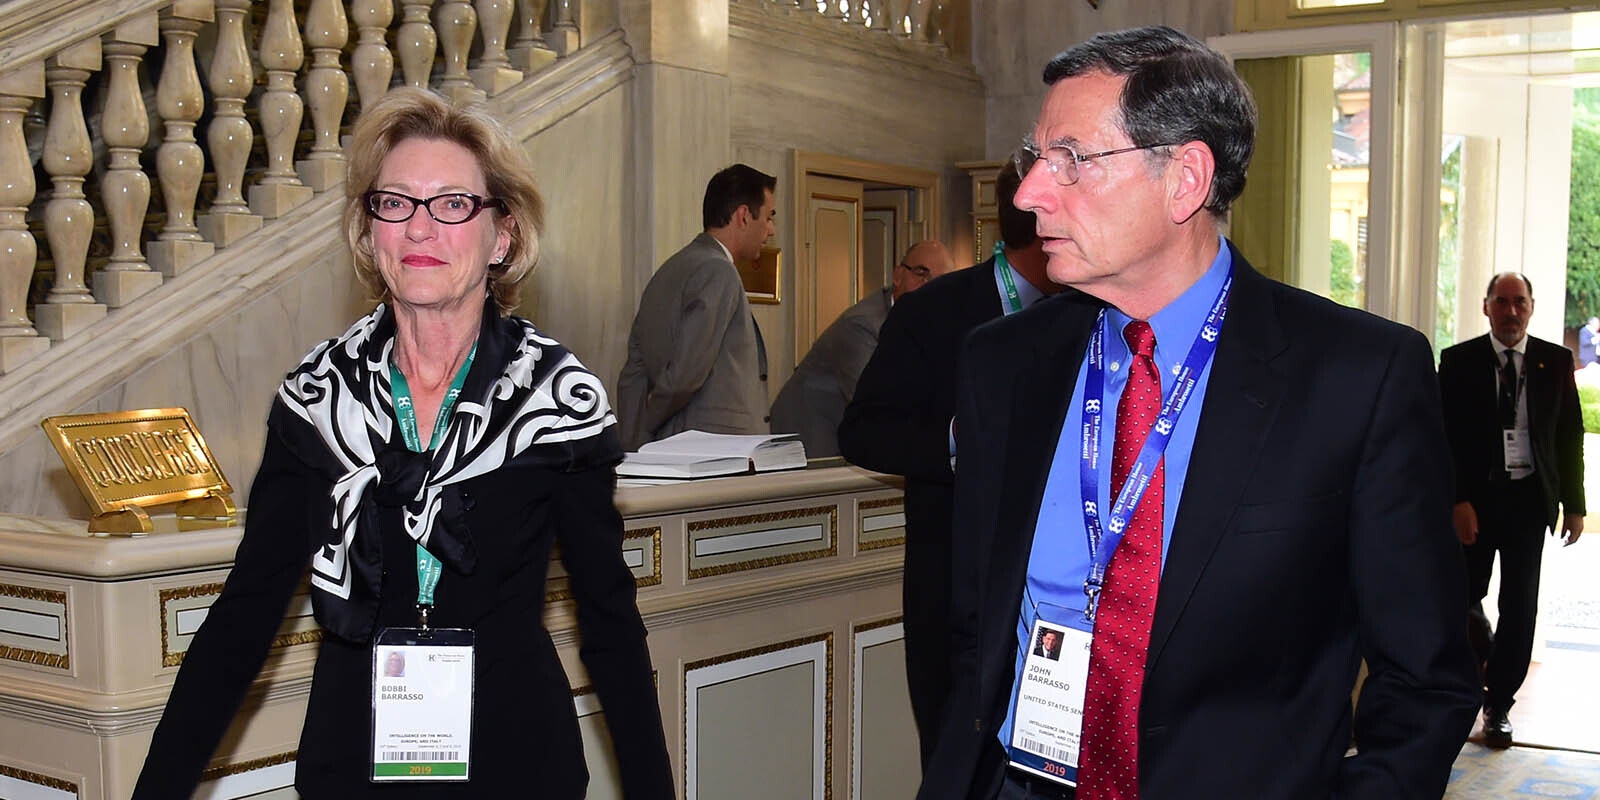 Bobbi Barrasso with husband Sen. John Barrasso at an economic forum in Italy in 2019.